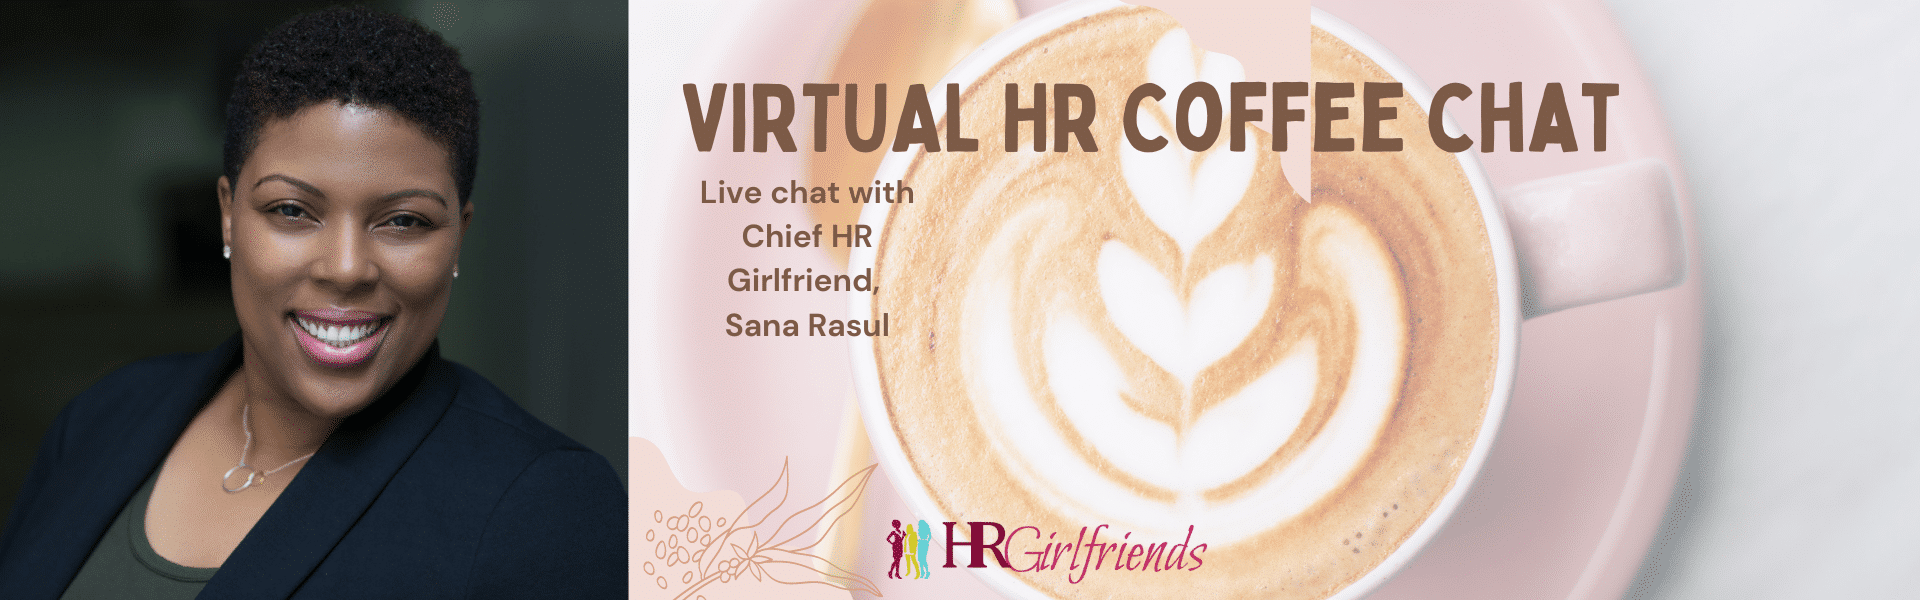 Live chat with hr